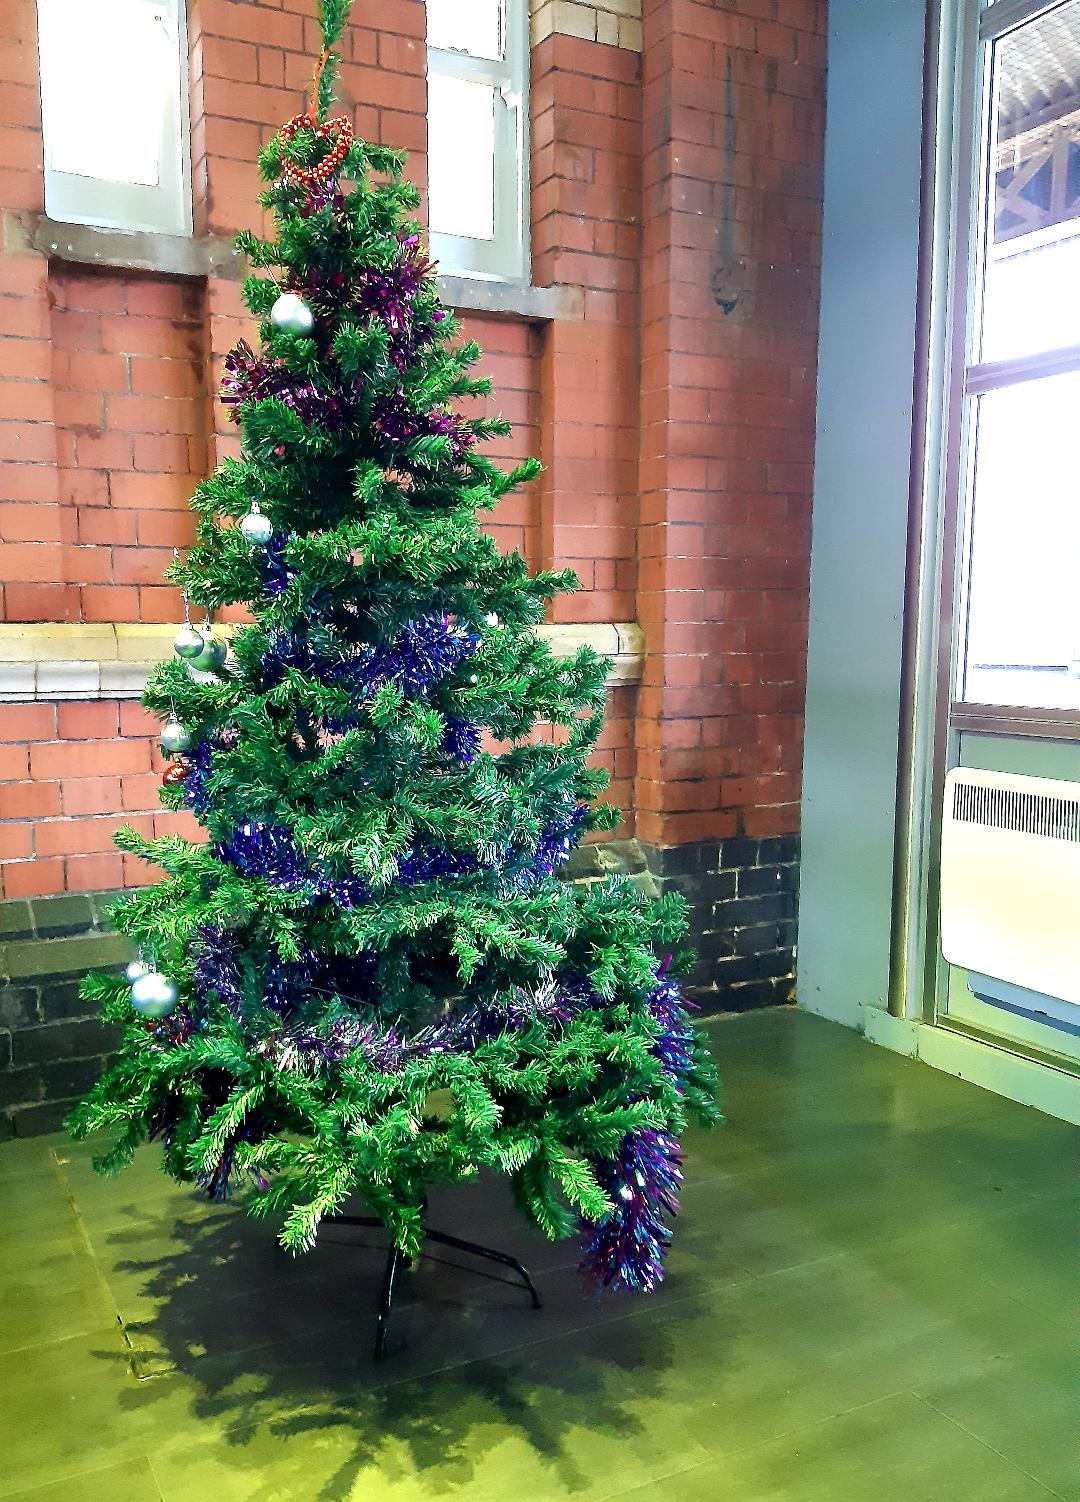 A Christmas tree standing in front of a brick wall in a station waiting room, decorated with tinsel and silver baubles.